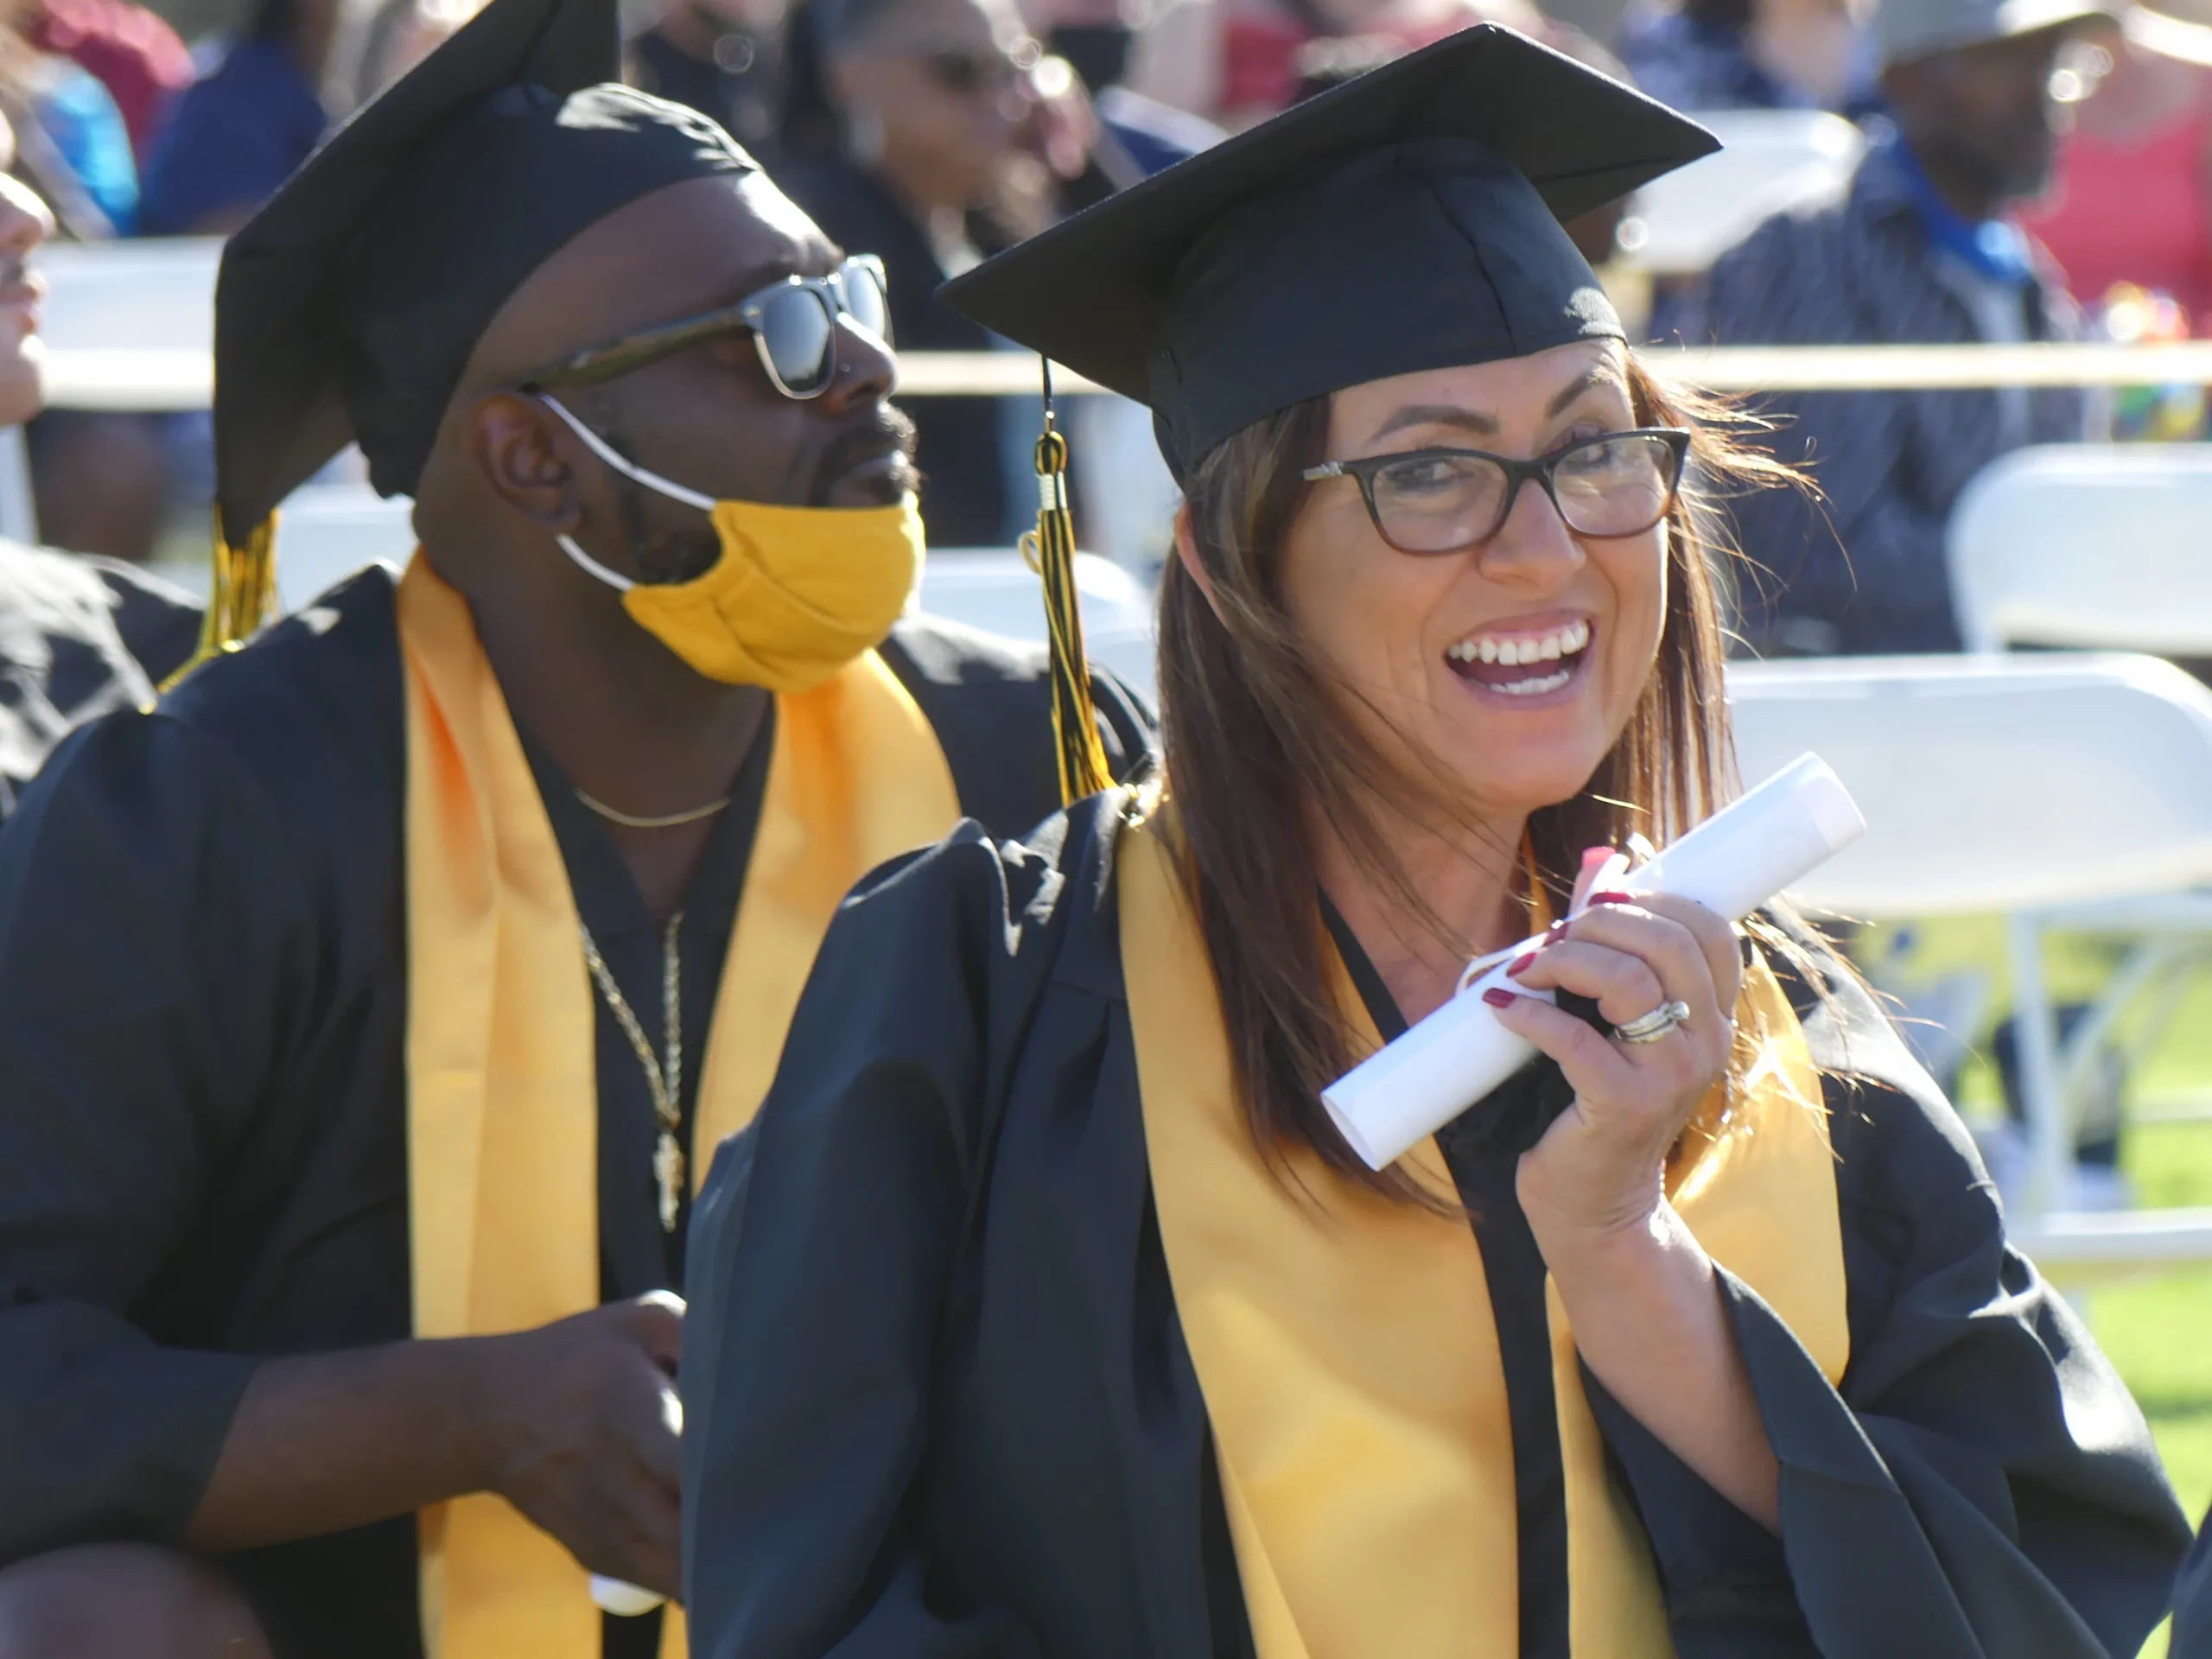 Women With Bachelor’s Degrees Earn Just As Much As Men With Associate’s Degrees